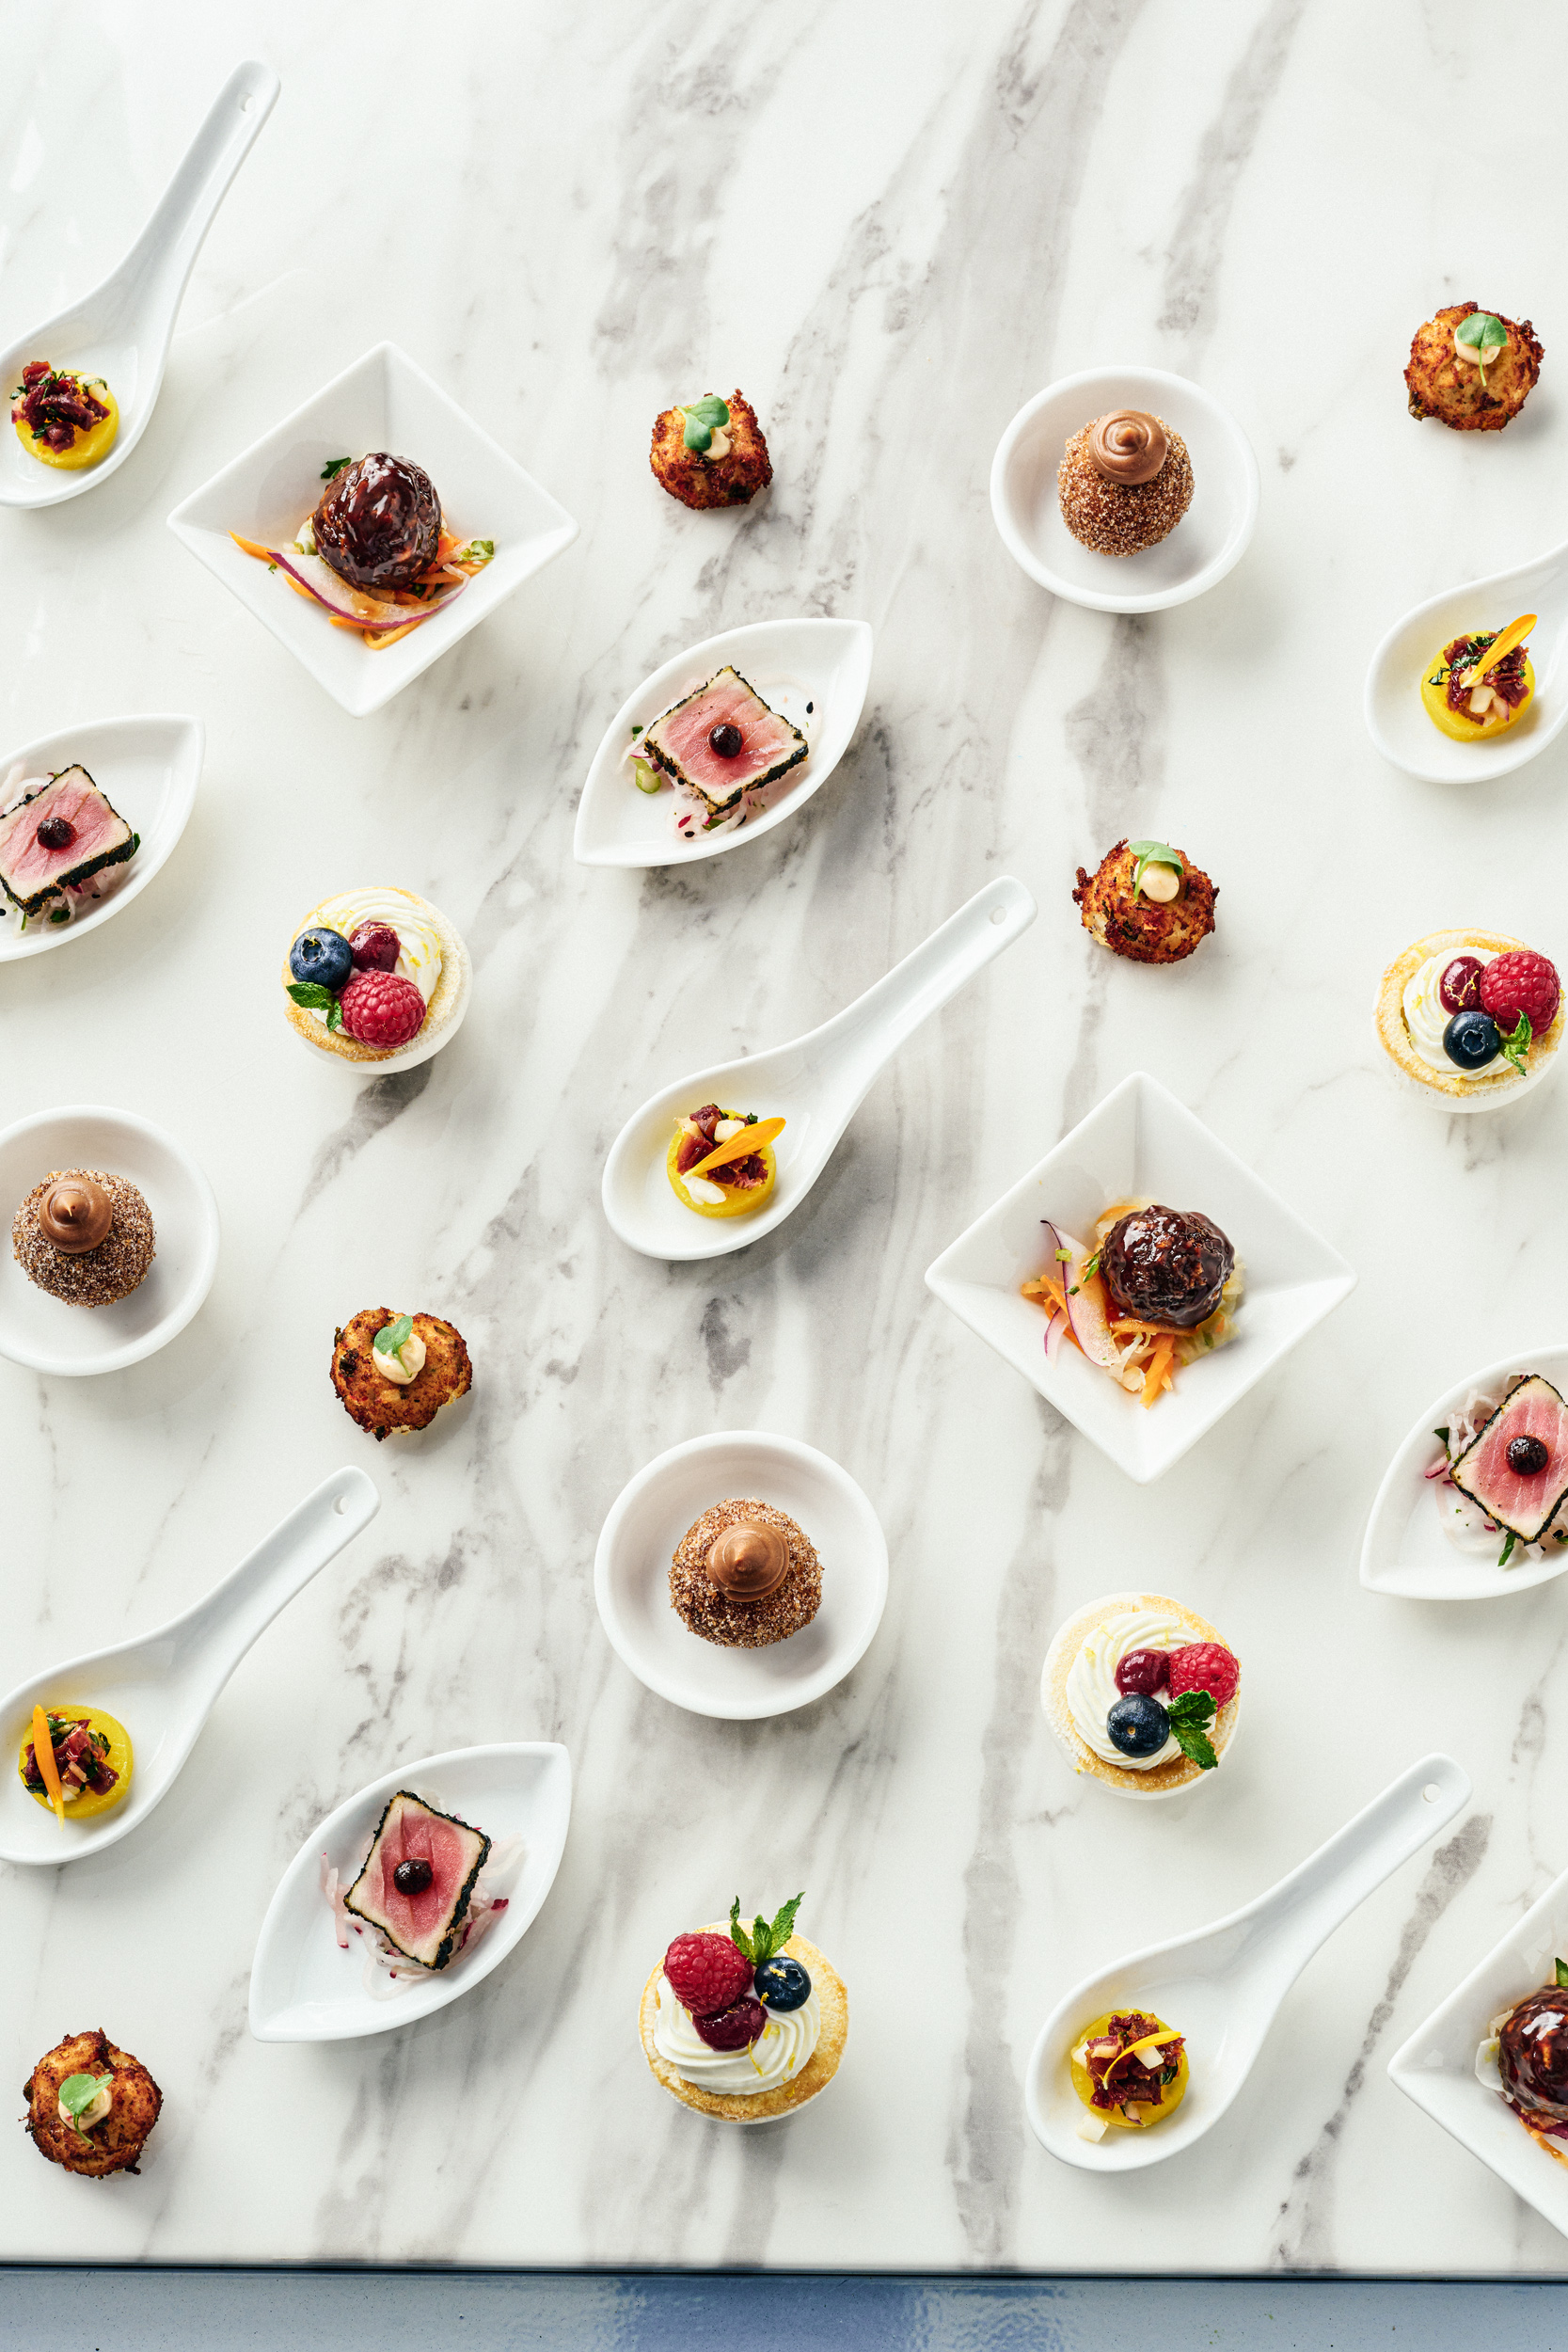 Overhead view of individually platted desserts